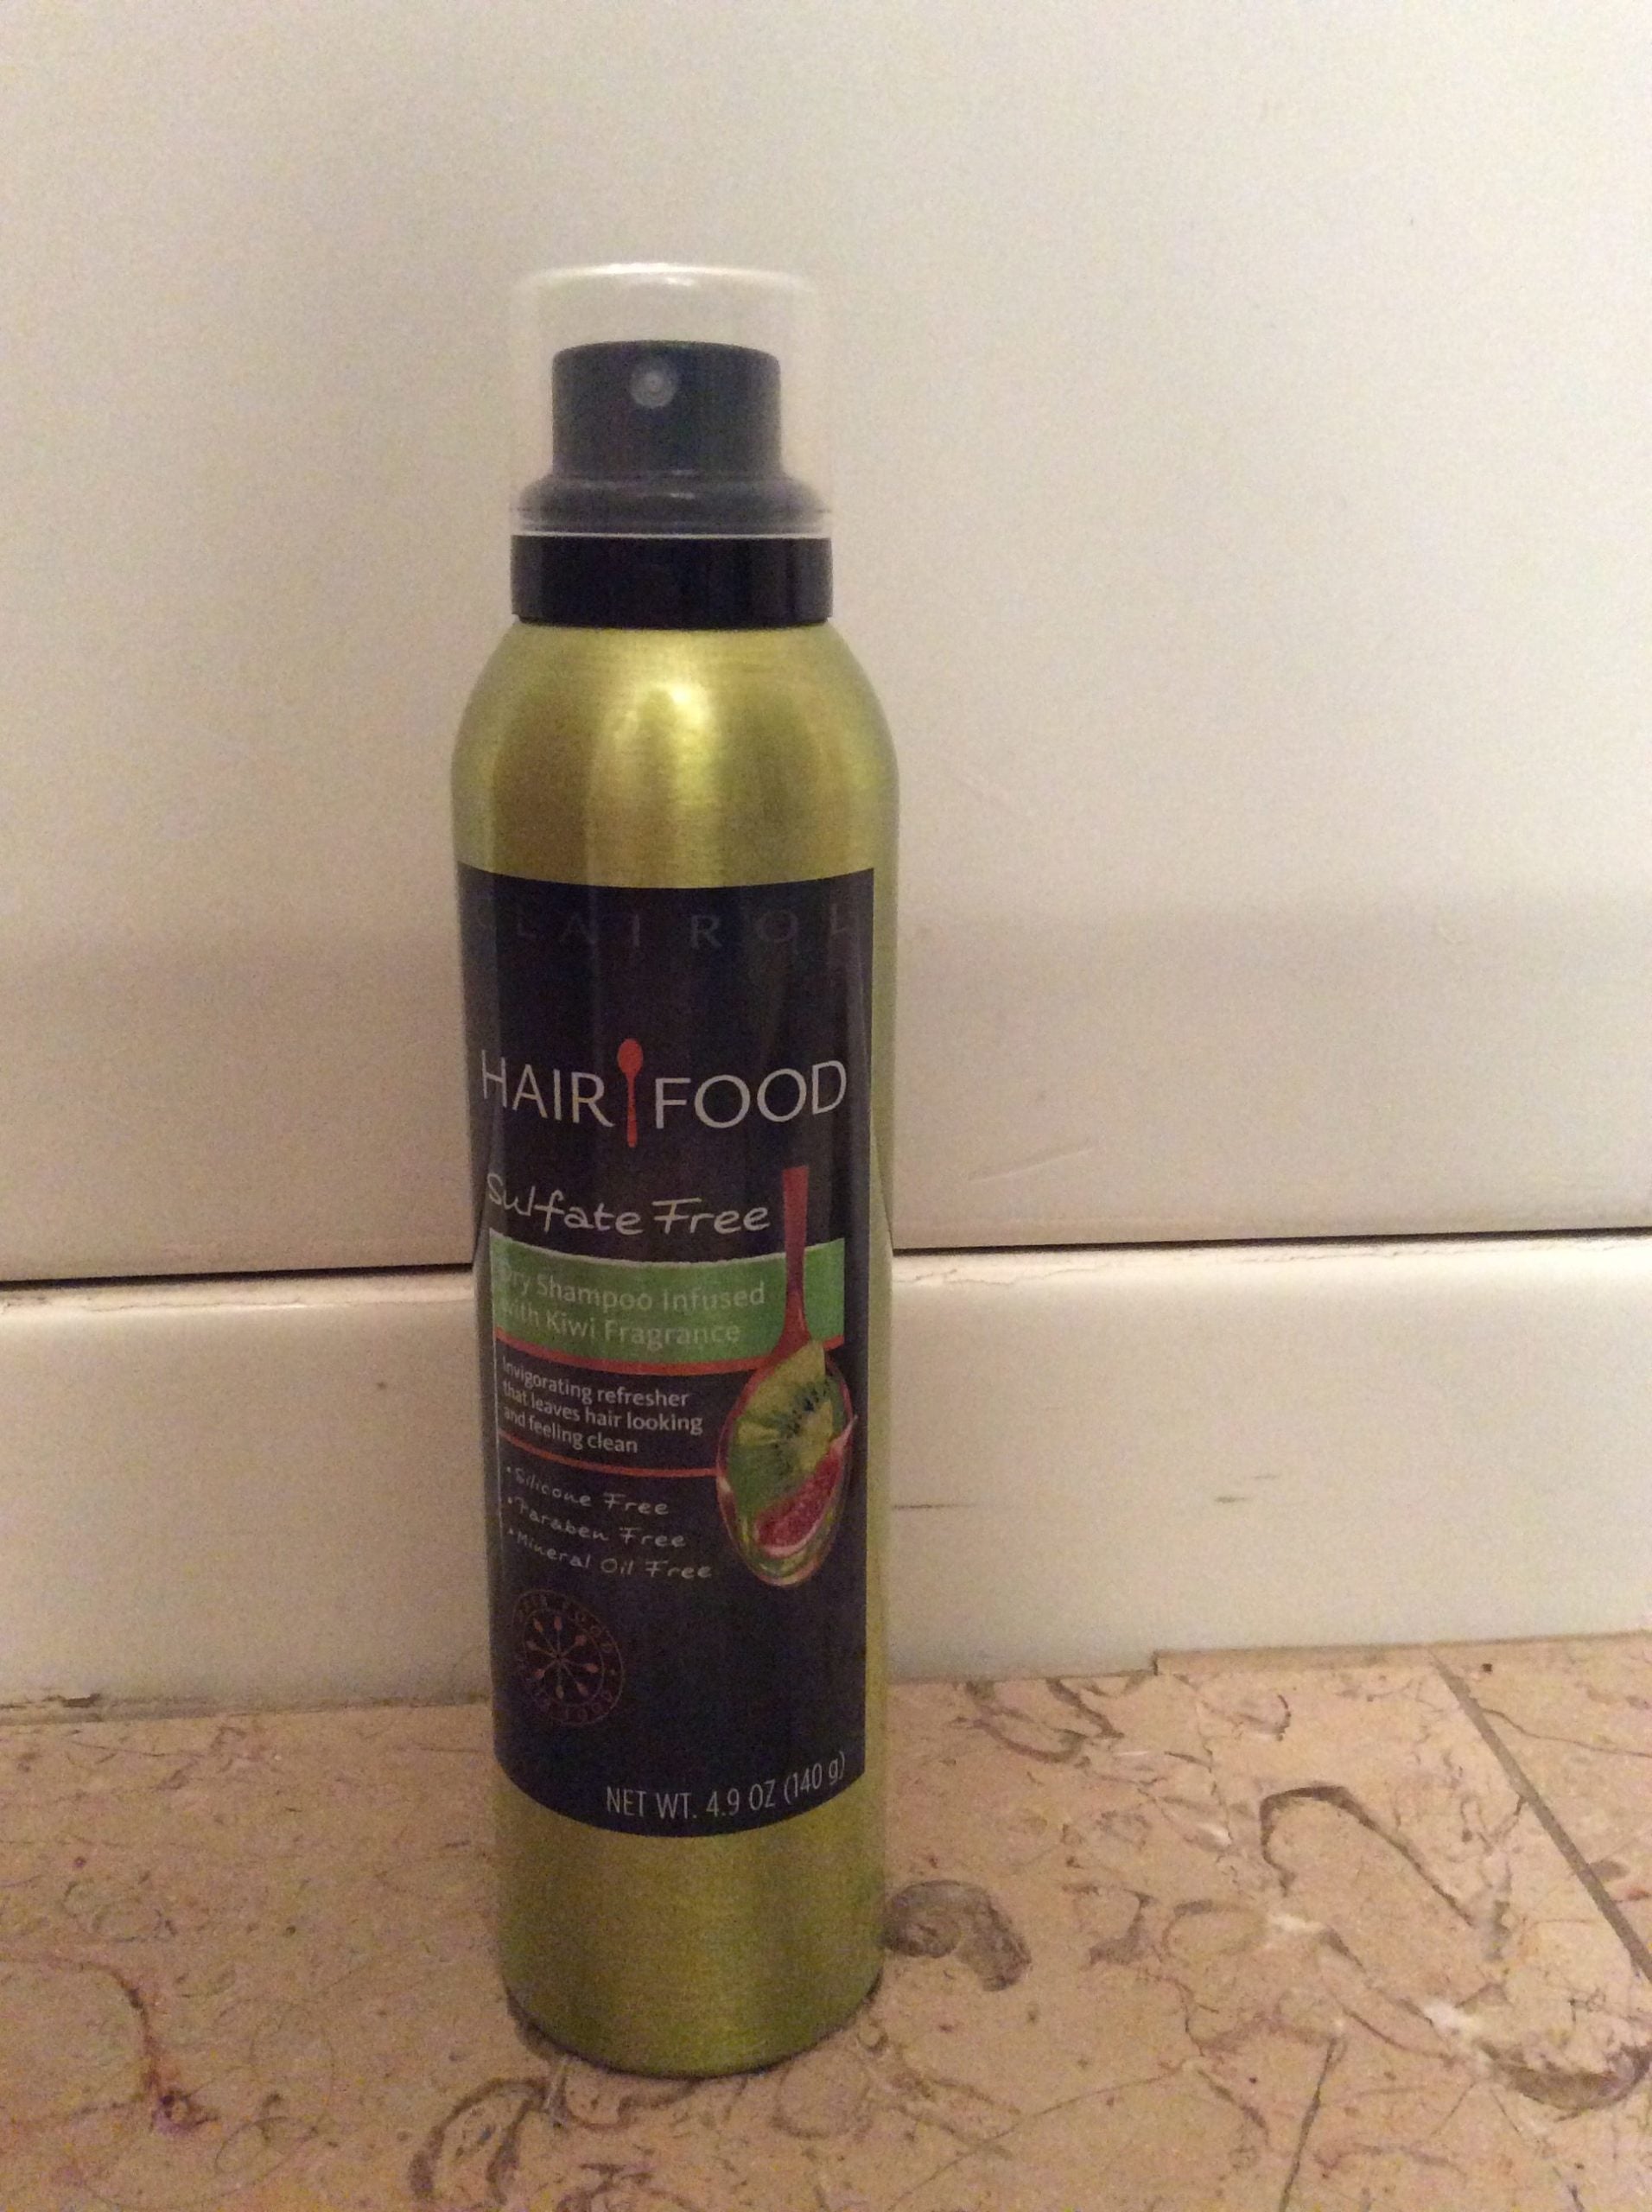 Review, Photos, Ingredients, Hairstyle, Haircare Trend 2017, 2018, 2019: Clairol Hair Food Sulfate Free Dry Shampoo Infused with Kiwi Fragrance